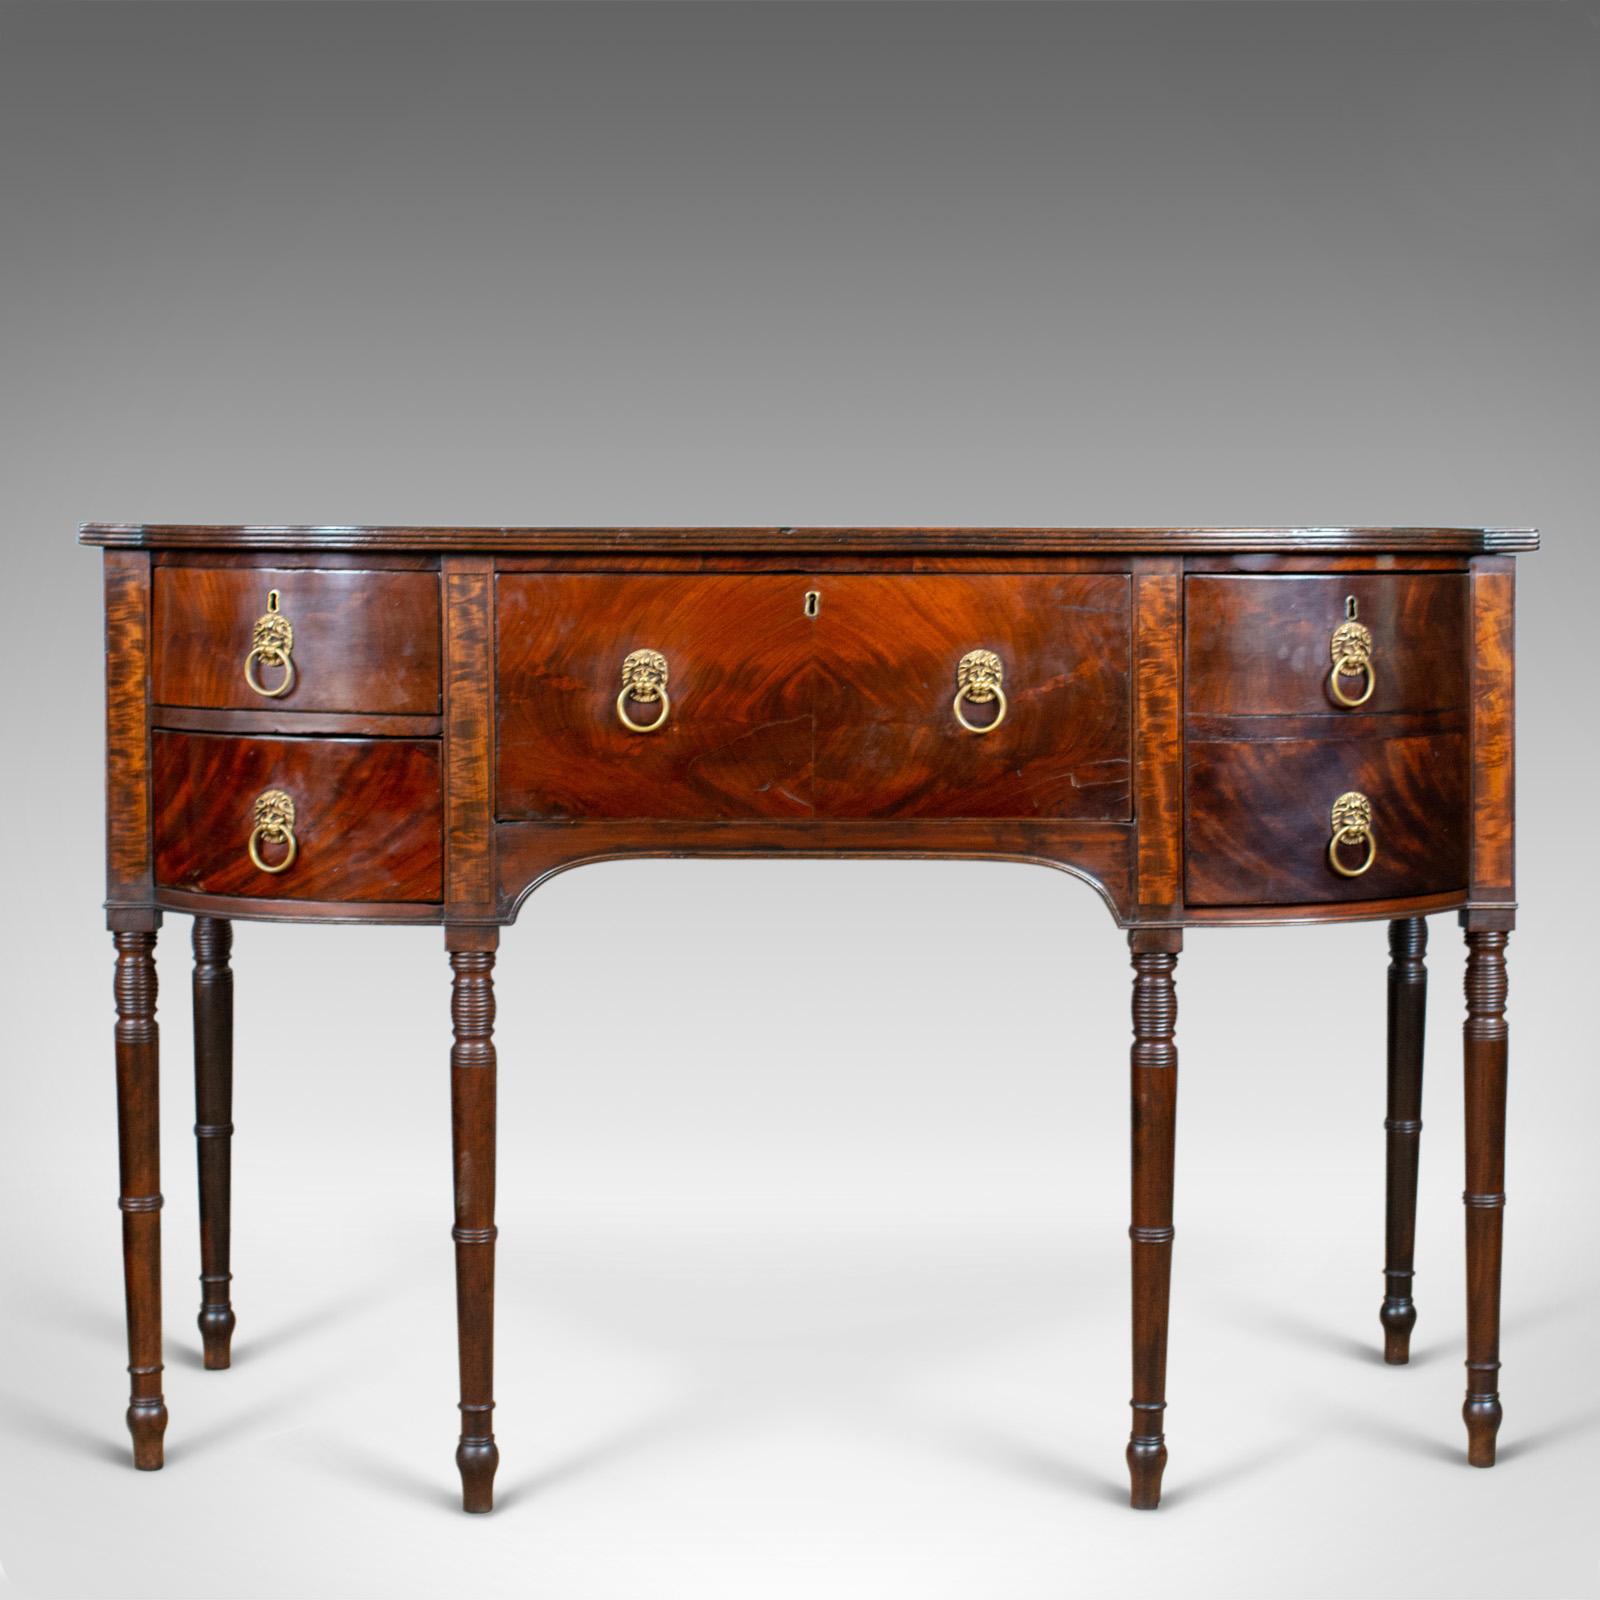 This is an antique secretaire, bow-fronted sideboard. An English, Georgian server with desk drawer in flame mahogany and dating to the late 18th century, circa 1790.

Rare to find in the secretaire configuration
Select flame mahogany with grain